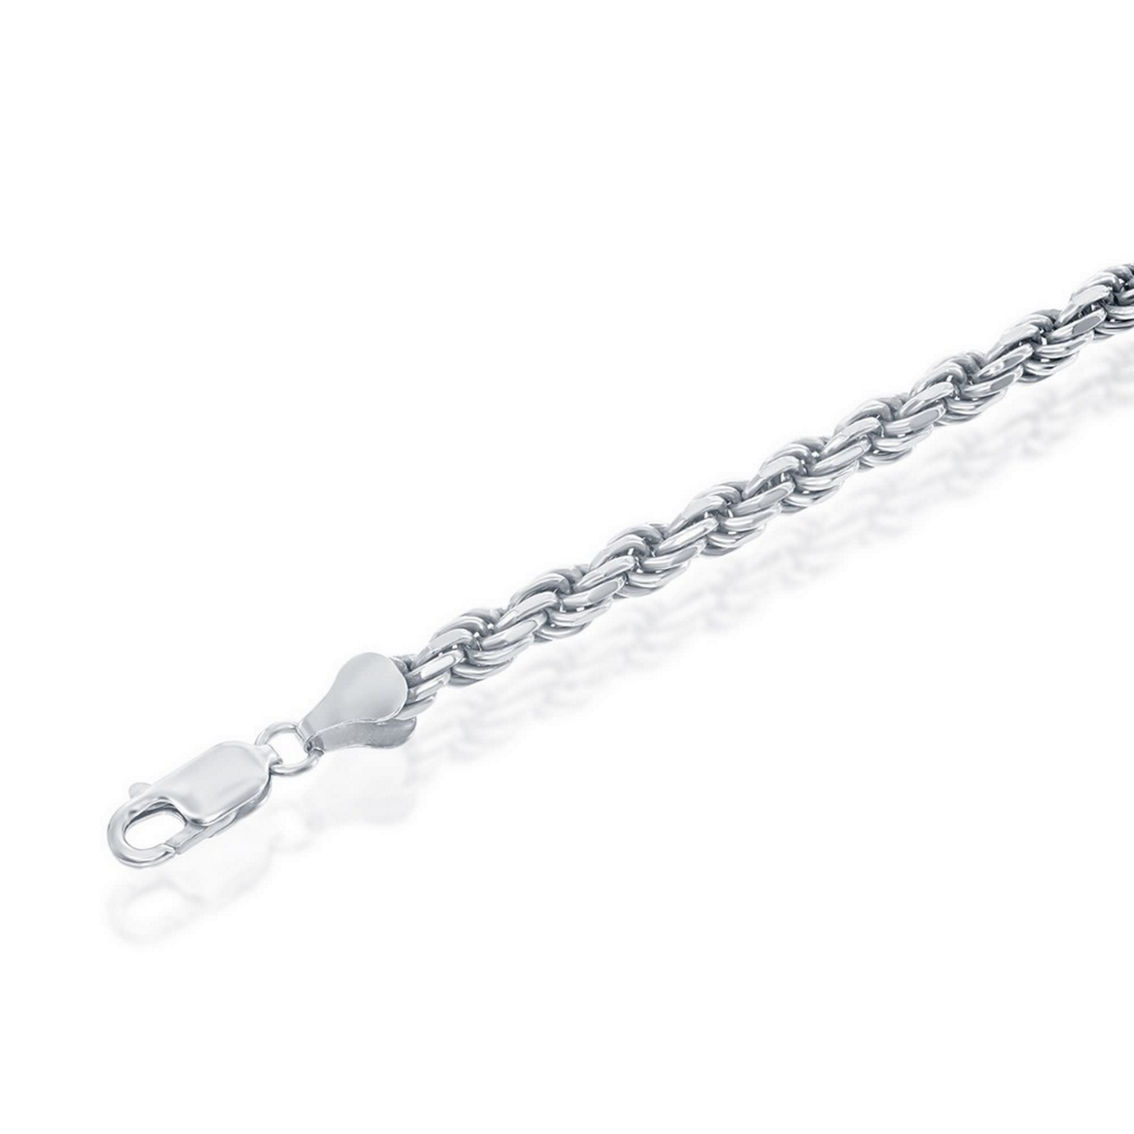 Links of Italy Sterling Silver Solid Diamond-Cut 5mm Rope Chain - Rhodium Plated - Image 2 of 3